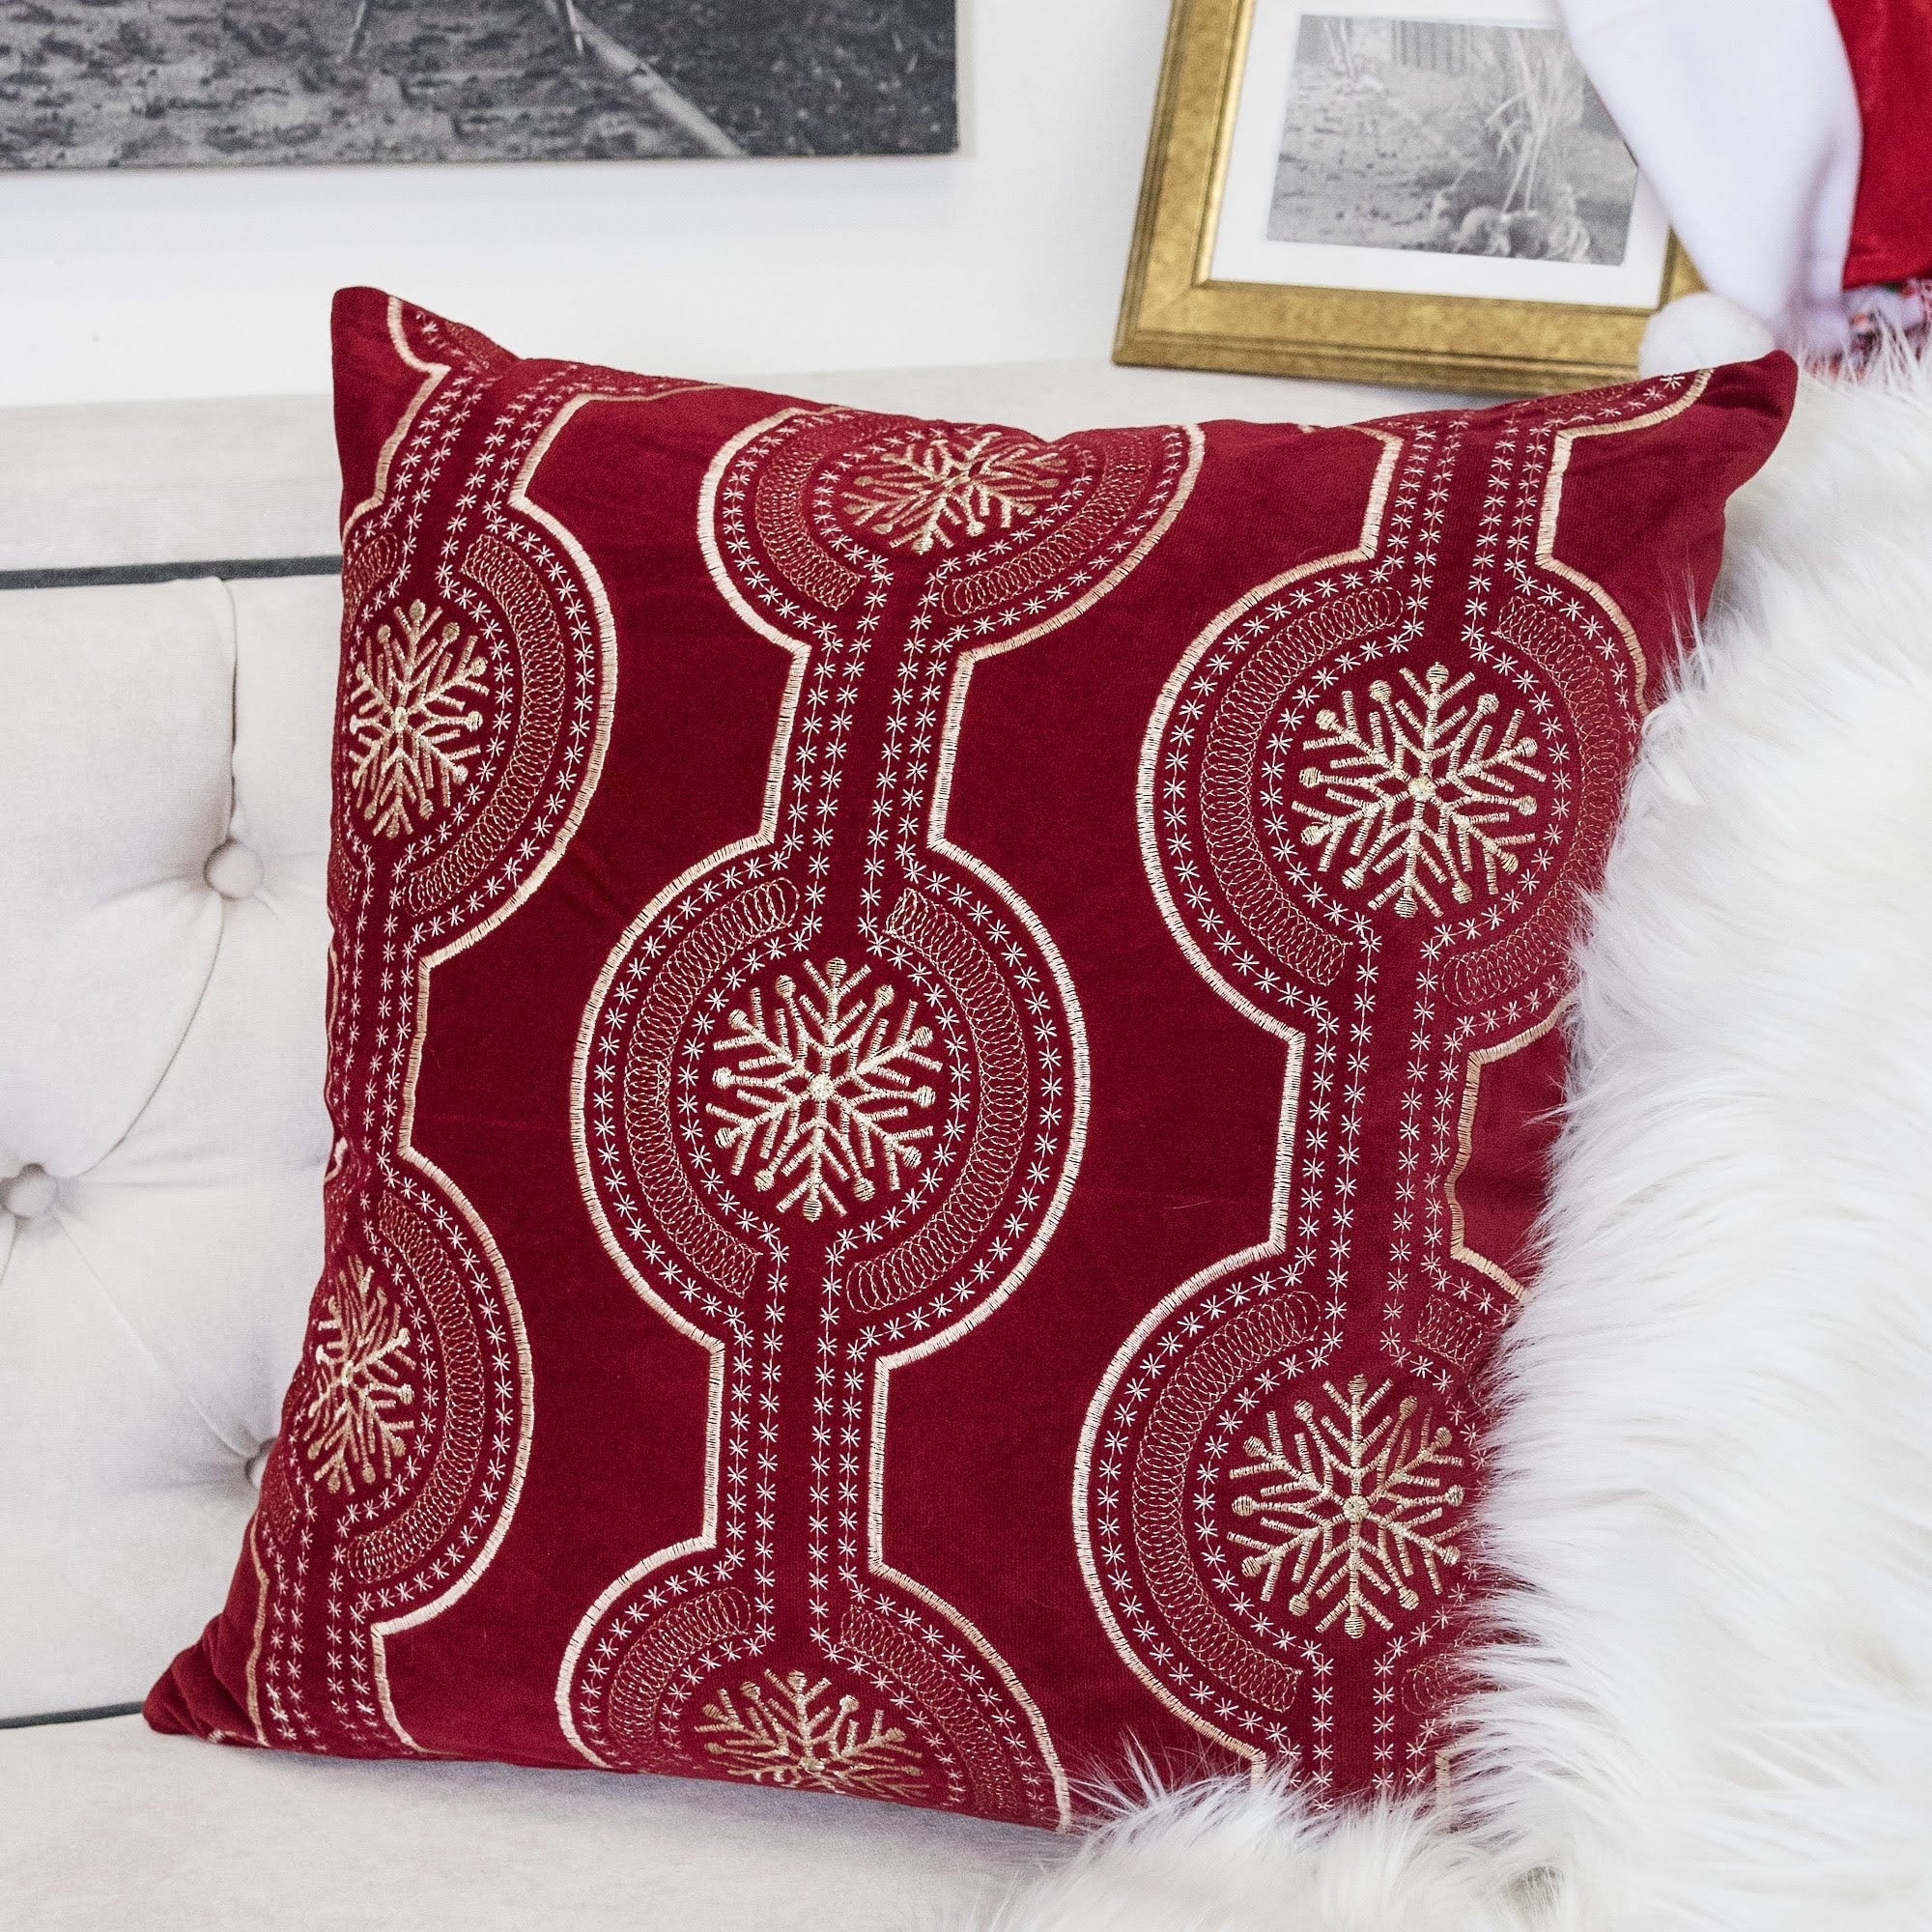 https://ak1.ostkcdn.com/images/products/is/images/direct/fc311b9ff419ae080826a530eb2bccebdb2aad3b/Lydia-Christmas-Holiday-Oversized-Pillow-with-Insert.jpg